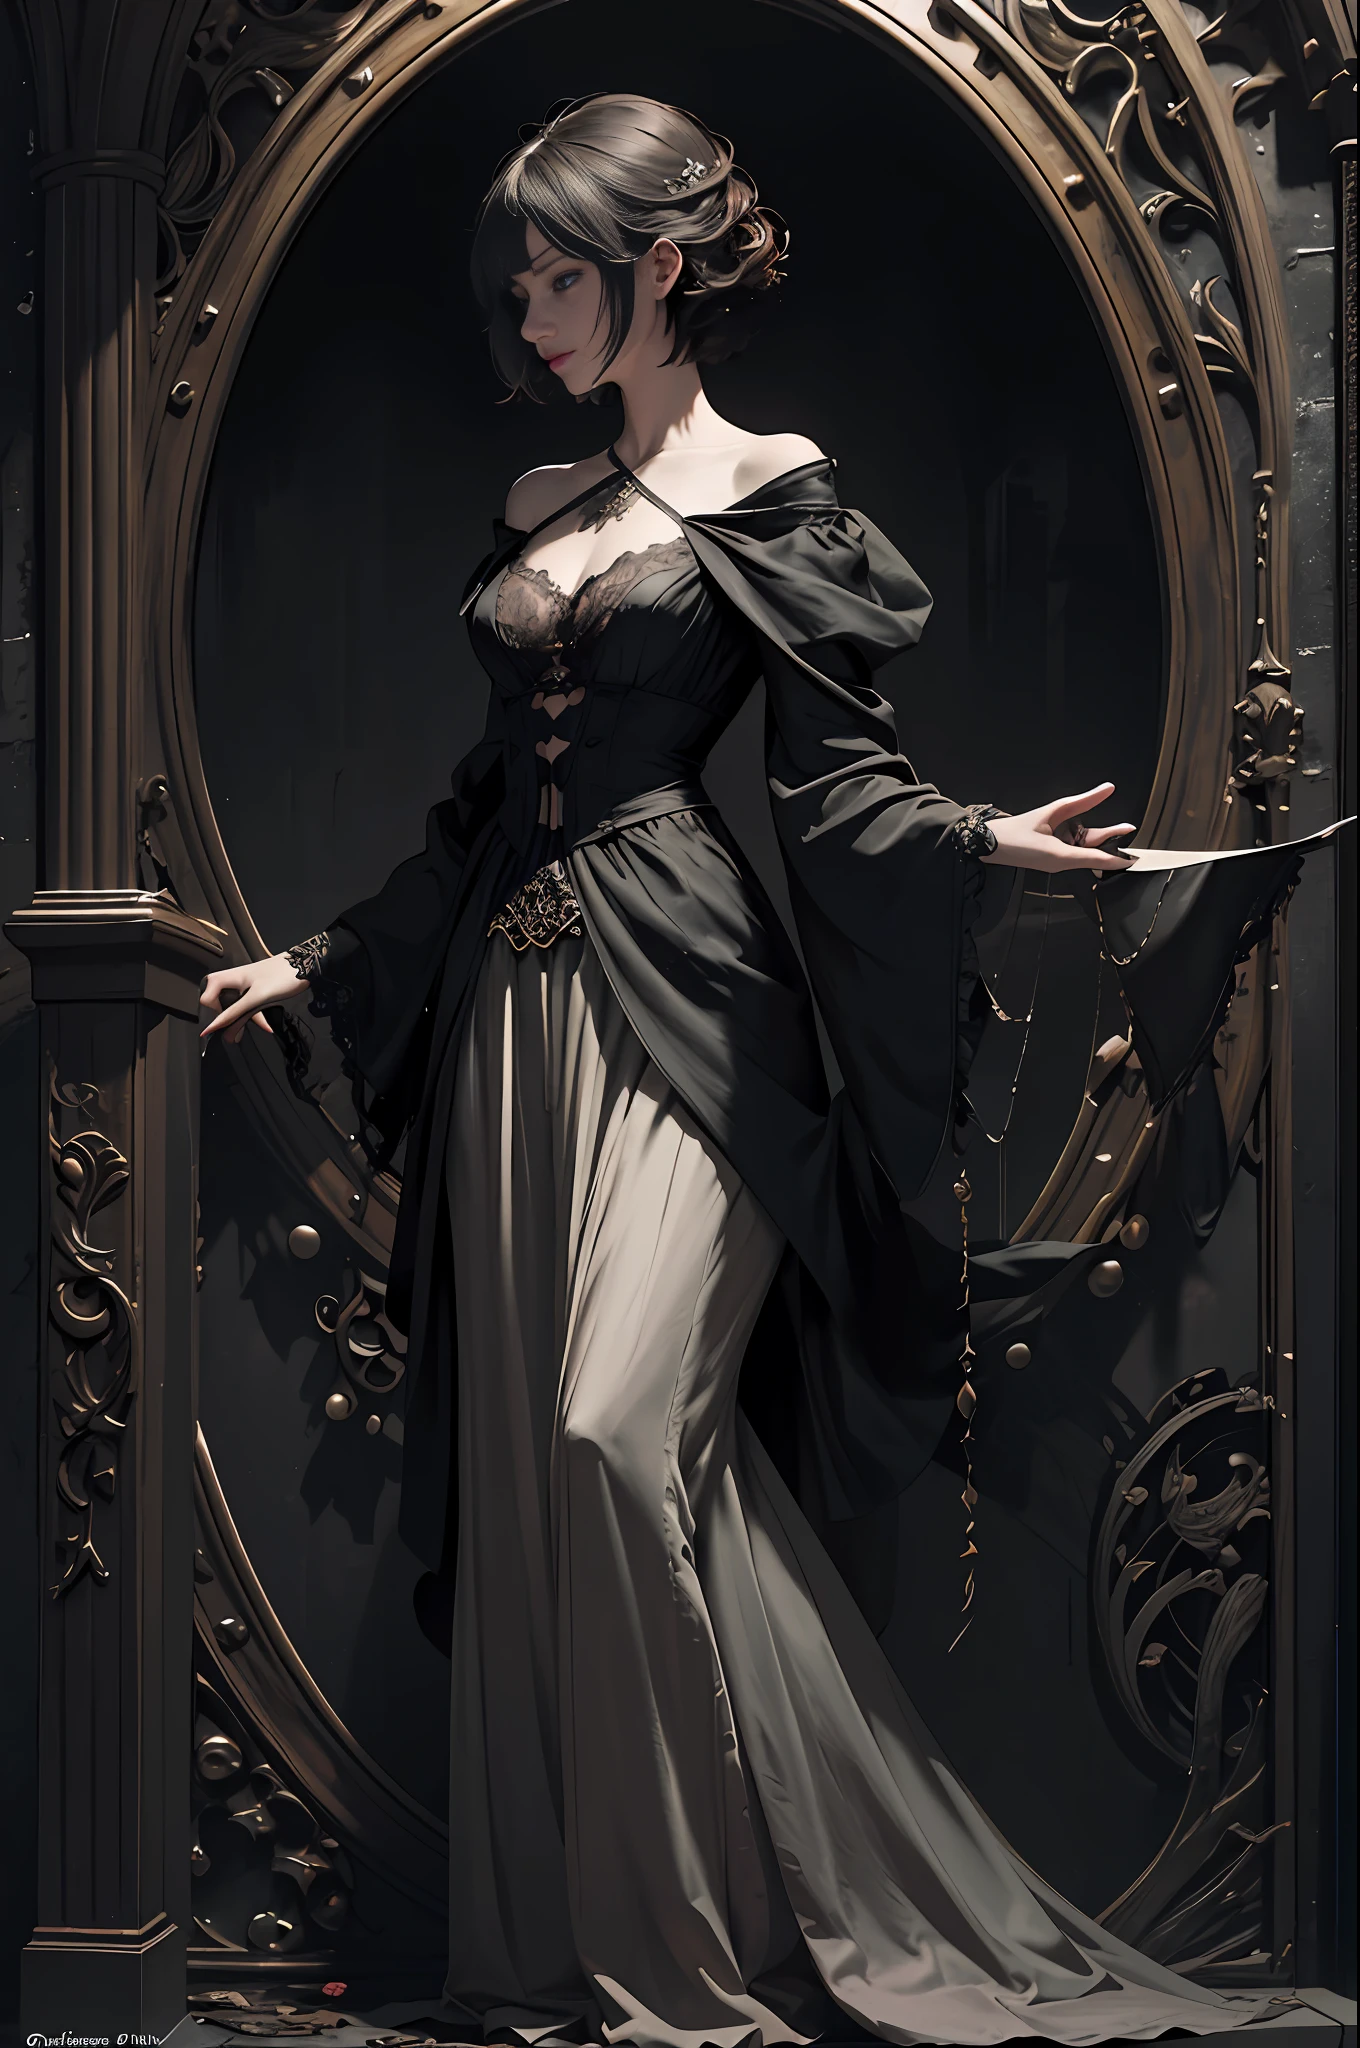 Official Art, Unity 8k wallpaper, super detailed, best quality, full body, short hair, messy hair,
dark, atmospheric, mystical, romantic, creepy, literature, art, fashion, victorian, decoration, intricacies, ironwork, contemplation, emotional depth, supernatural, 1 girl, solo, flat chest, full body composition